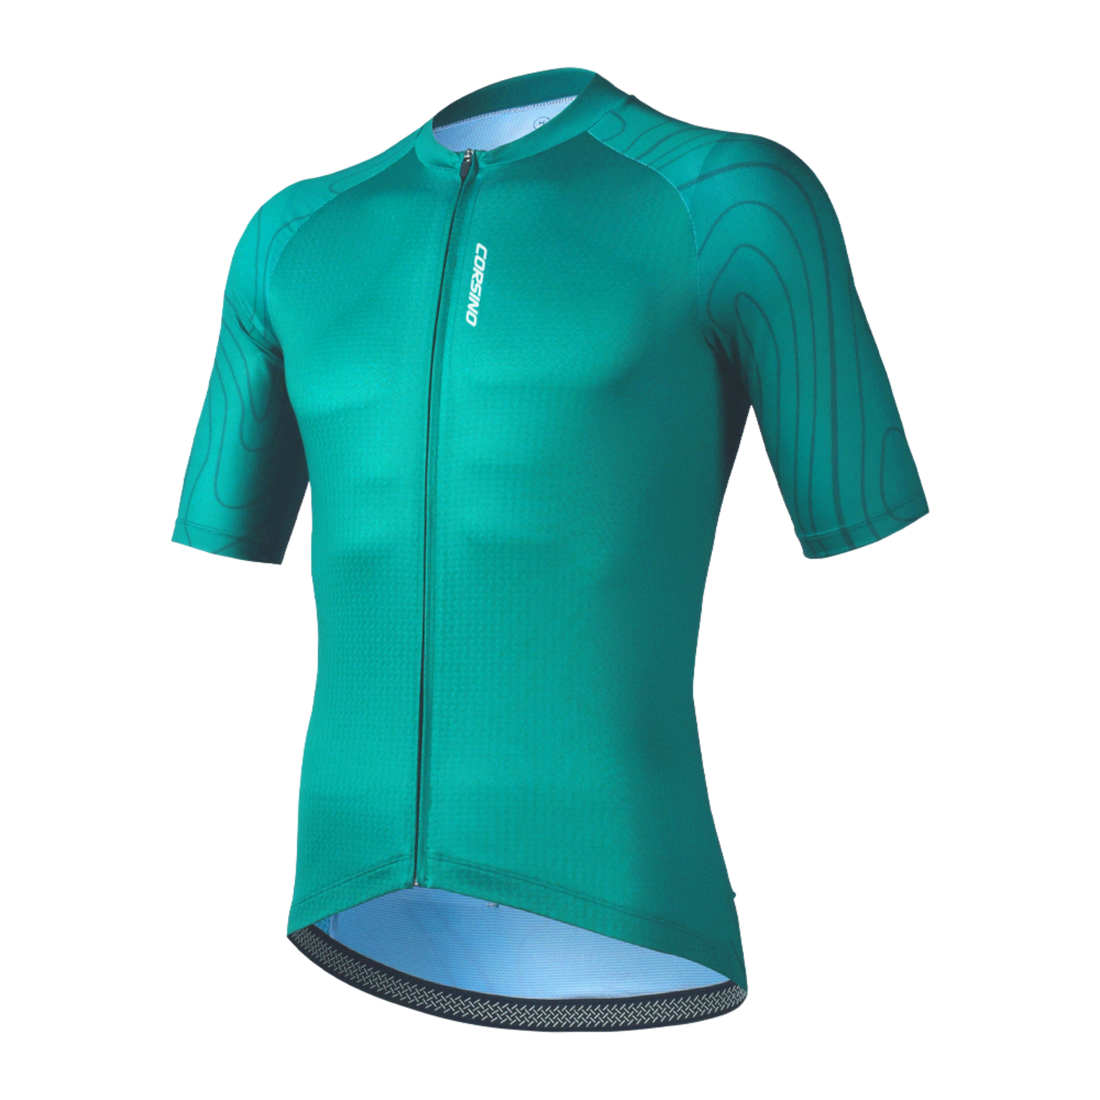 Front view of the Corsino Venice women's teal short sleeve cycling jersey.